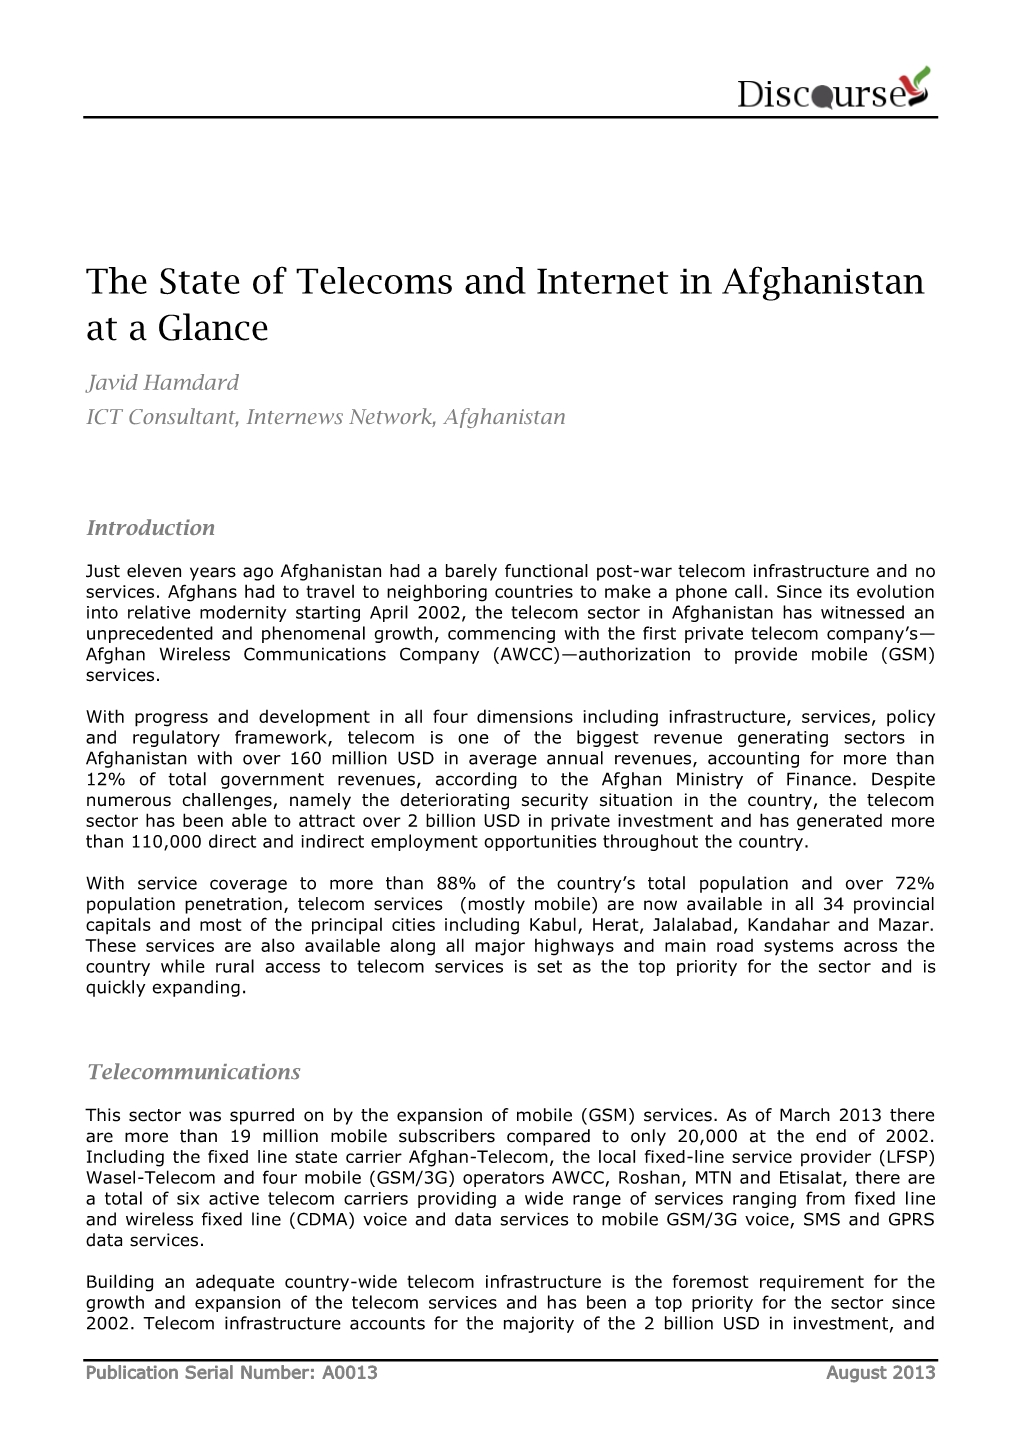 The State of Telecoms and Internet in Afghanistan at a Glance